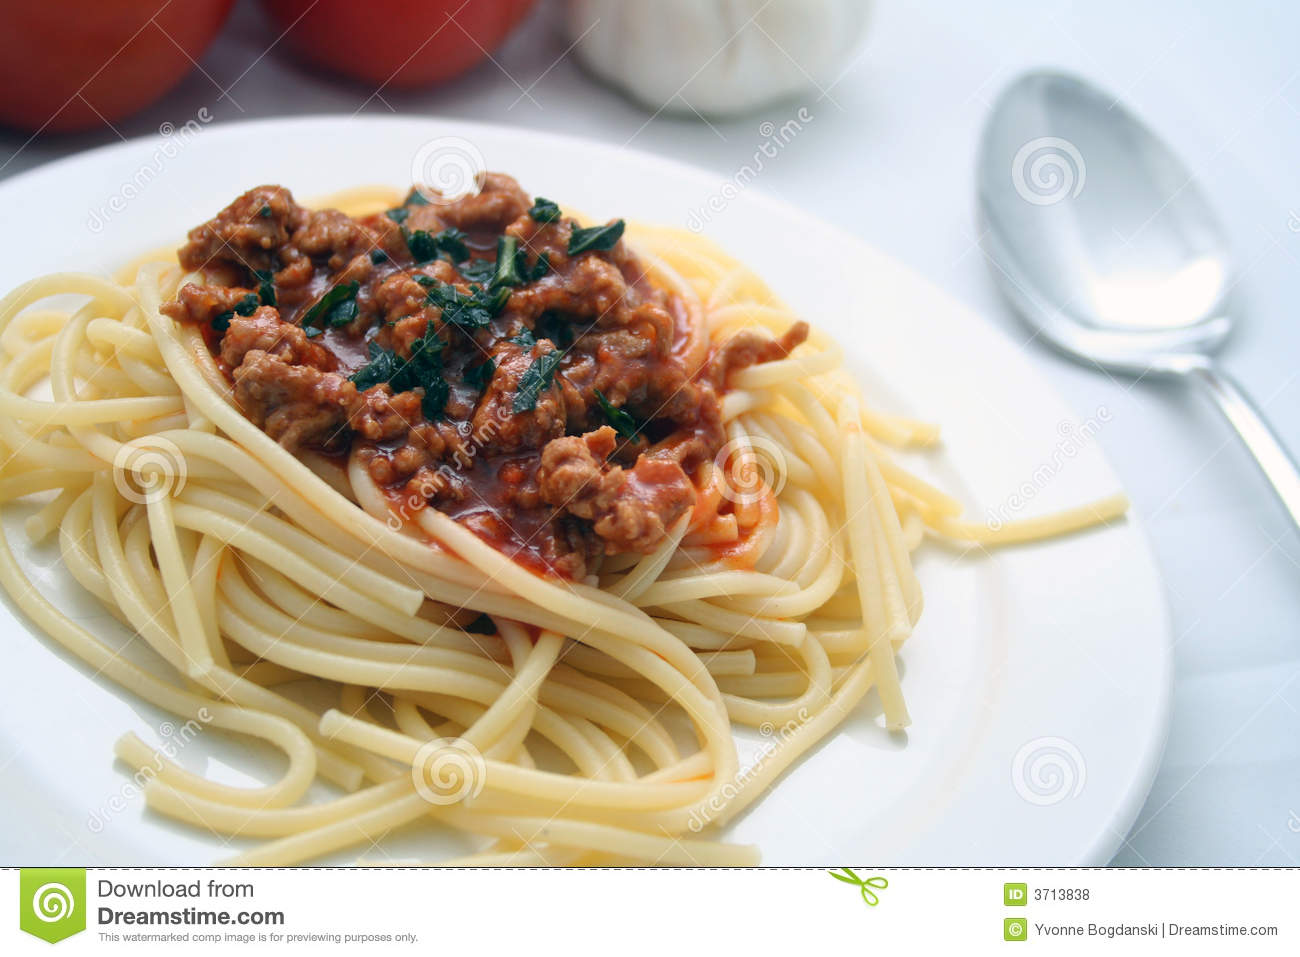 Spaghetti With Meat Sauce Royalty Free Stock Photos   Image  3713838